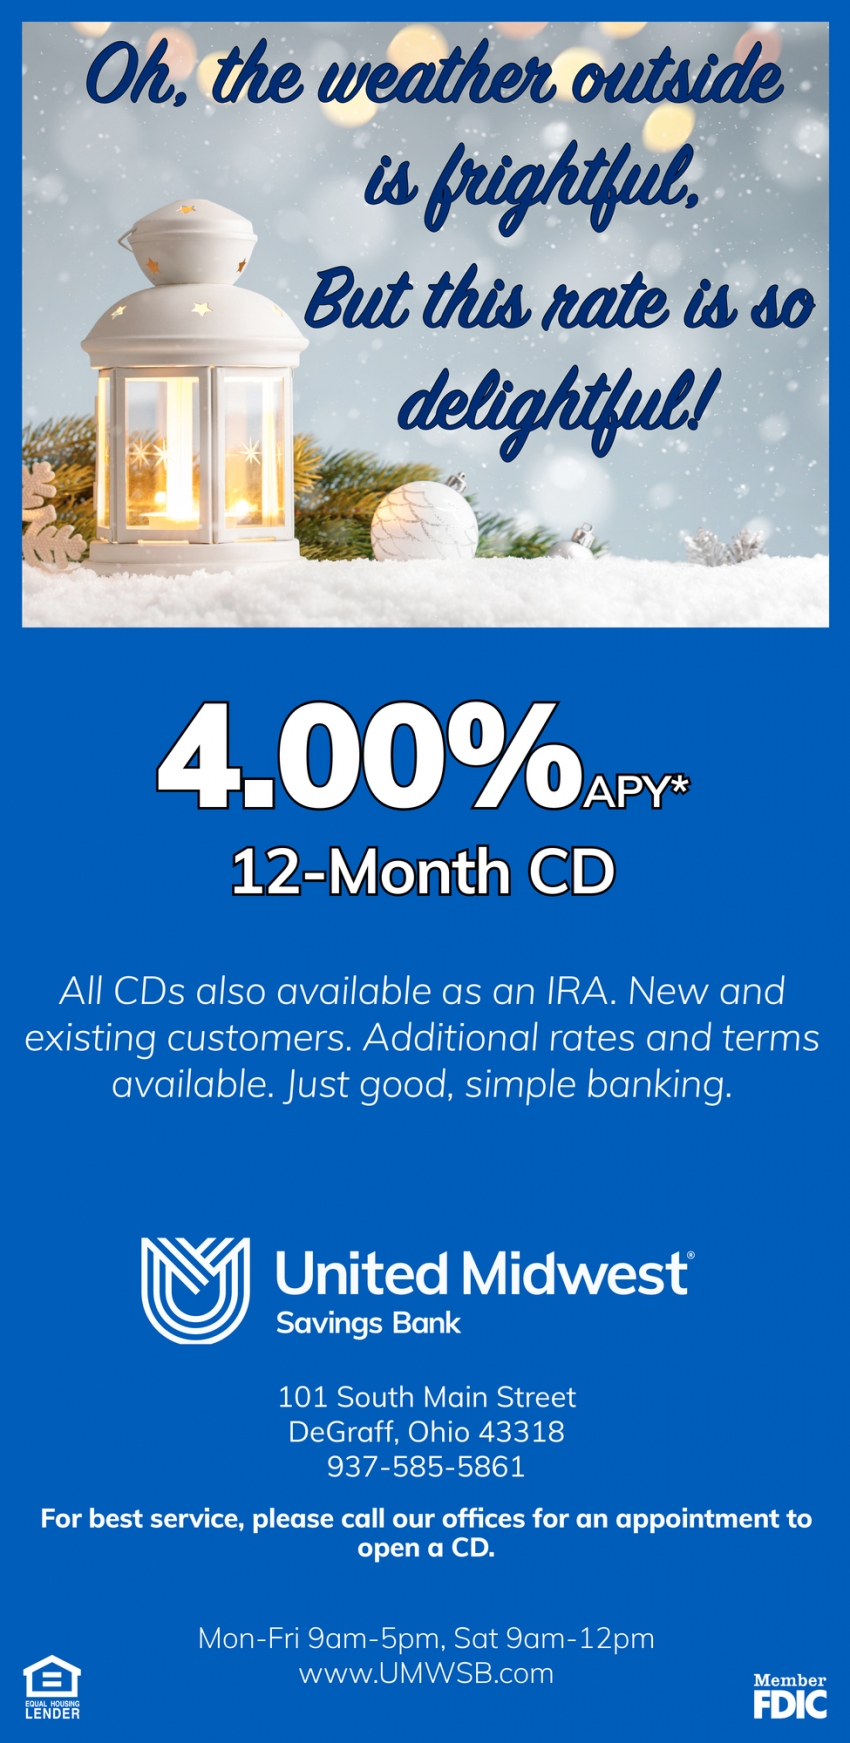 4.00% APY* 12-Month CD